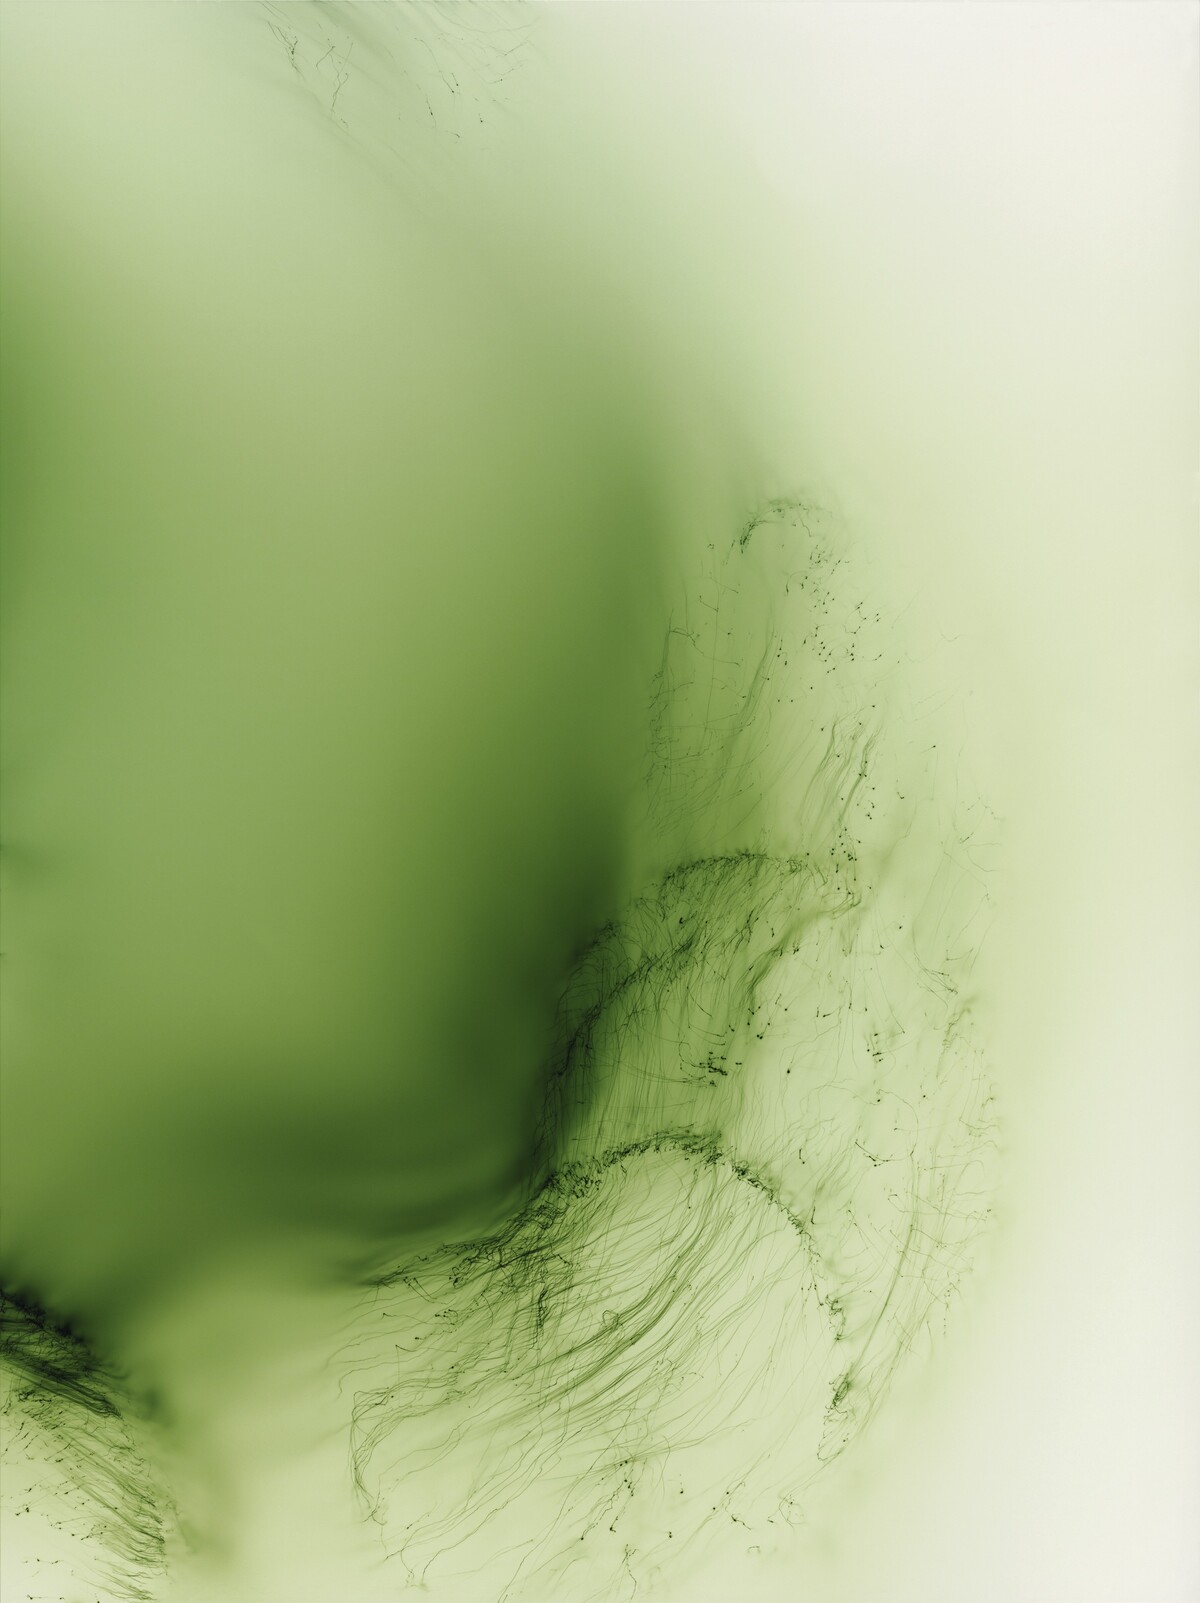 An abstract image with green and white swirls